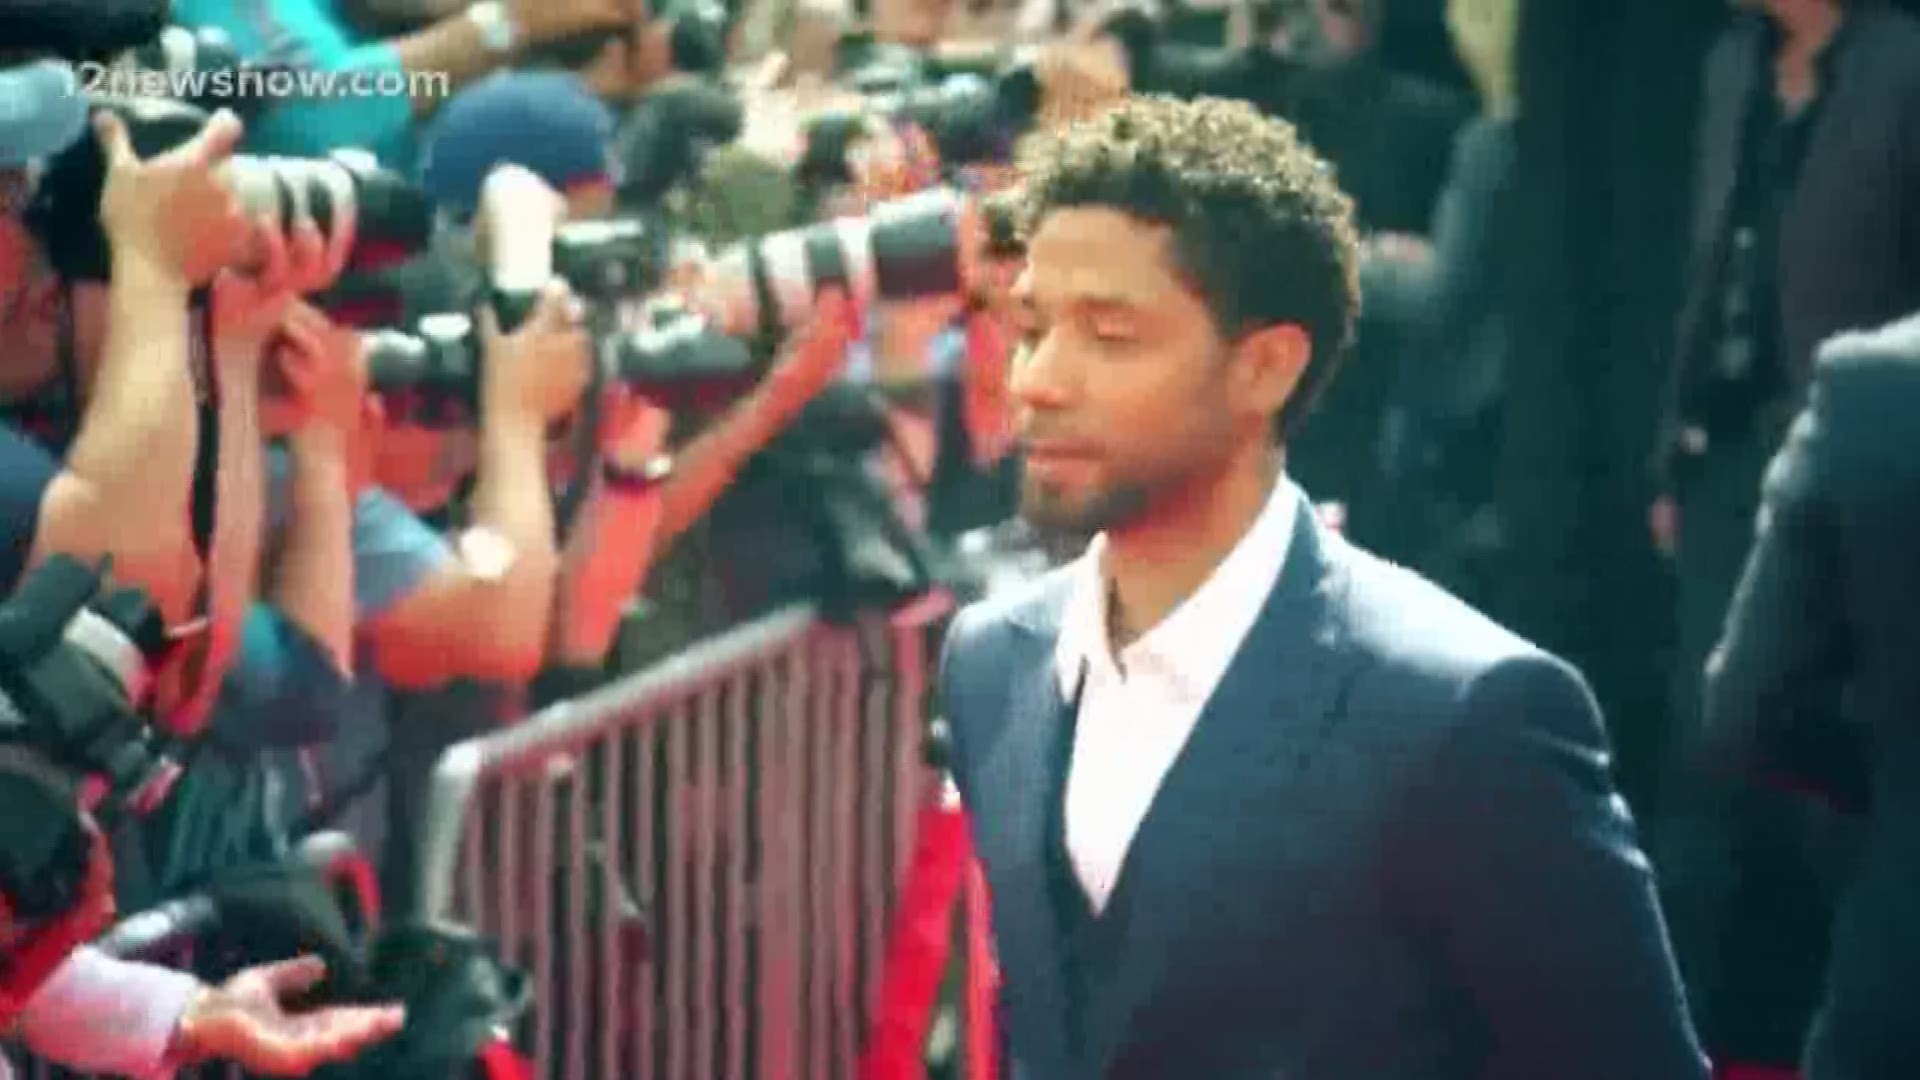 The complain is due to Smollett refusing to pay more than $130,000 to reimburse the Chicago police for the investigative cost of his allege false assault claims.